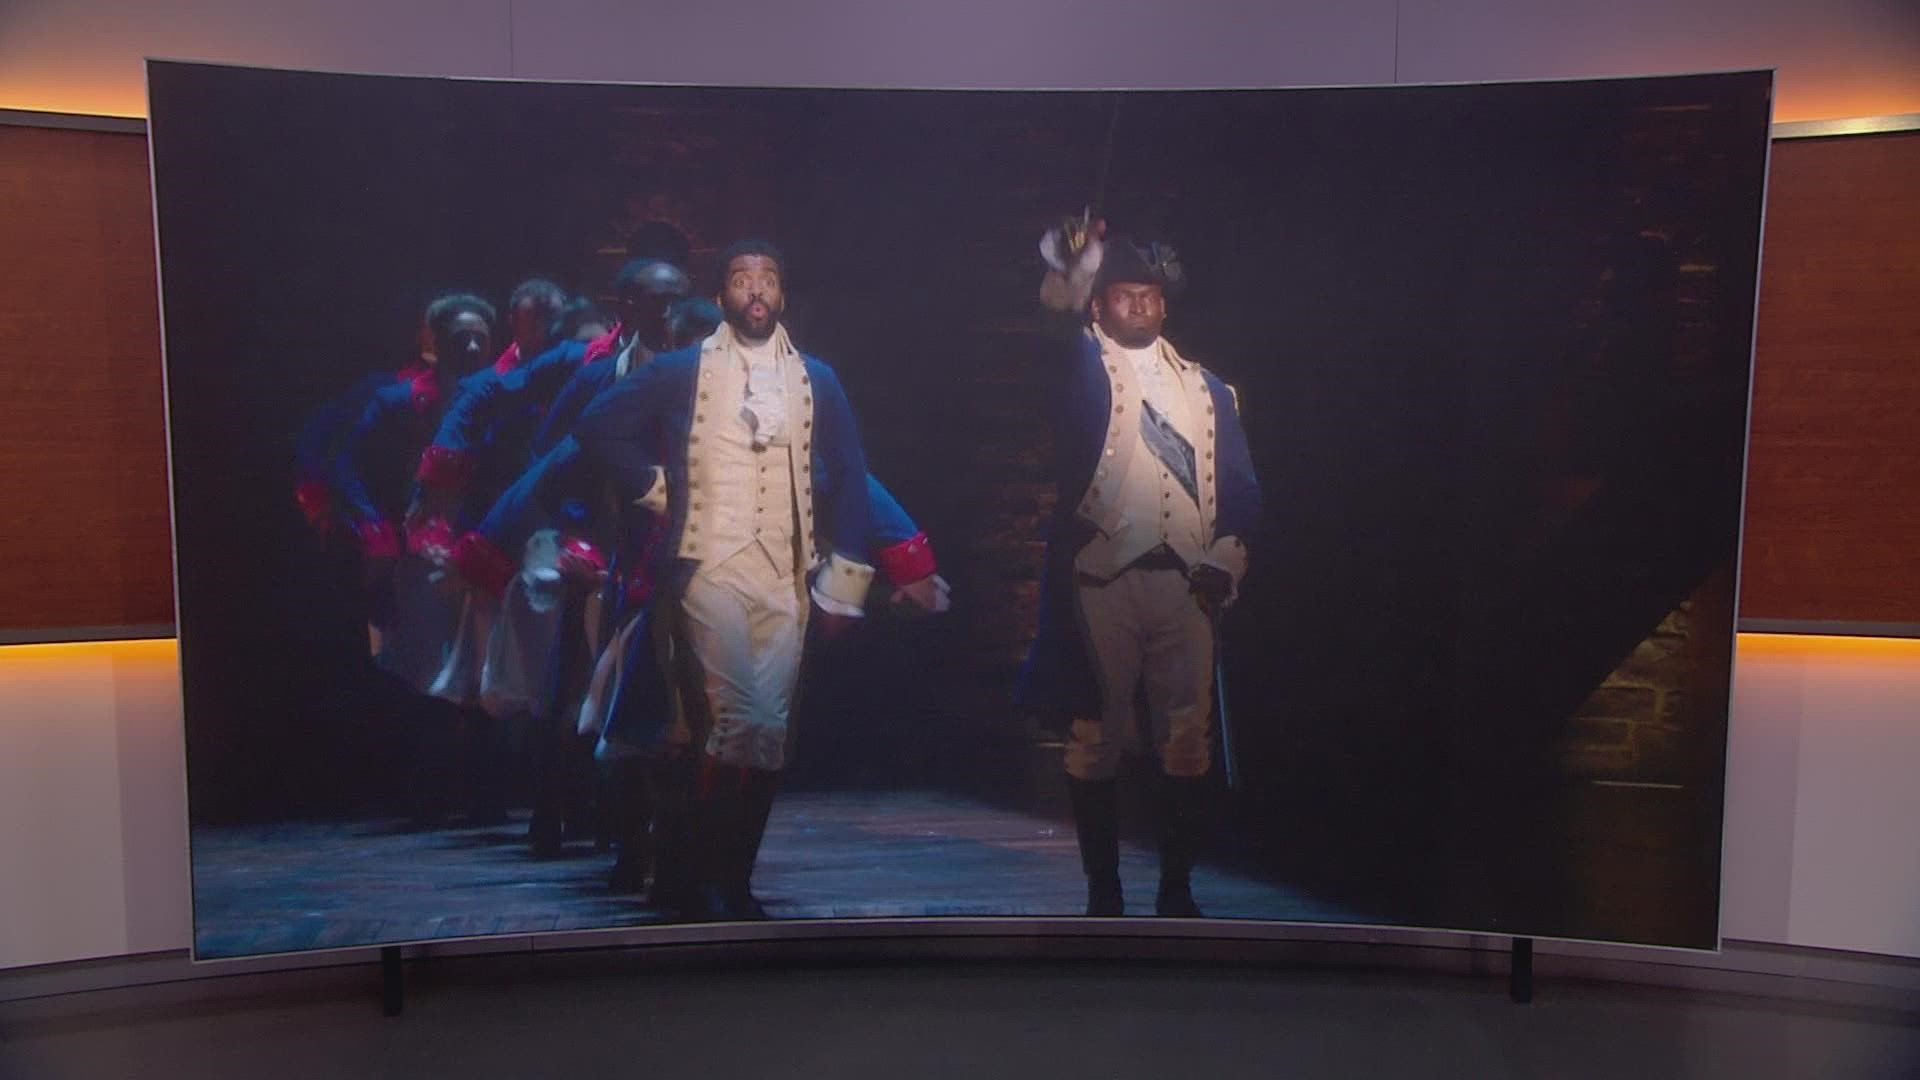 Broadway hit musical Hamilton makes a stop in Seattle at the Paramount Theatre.